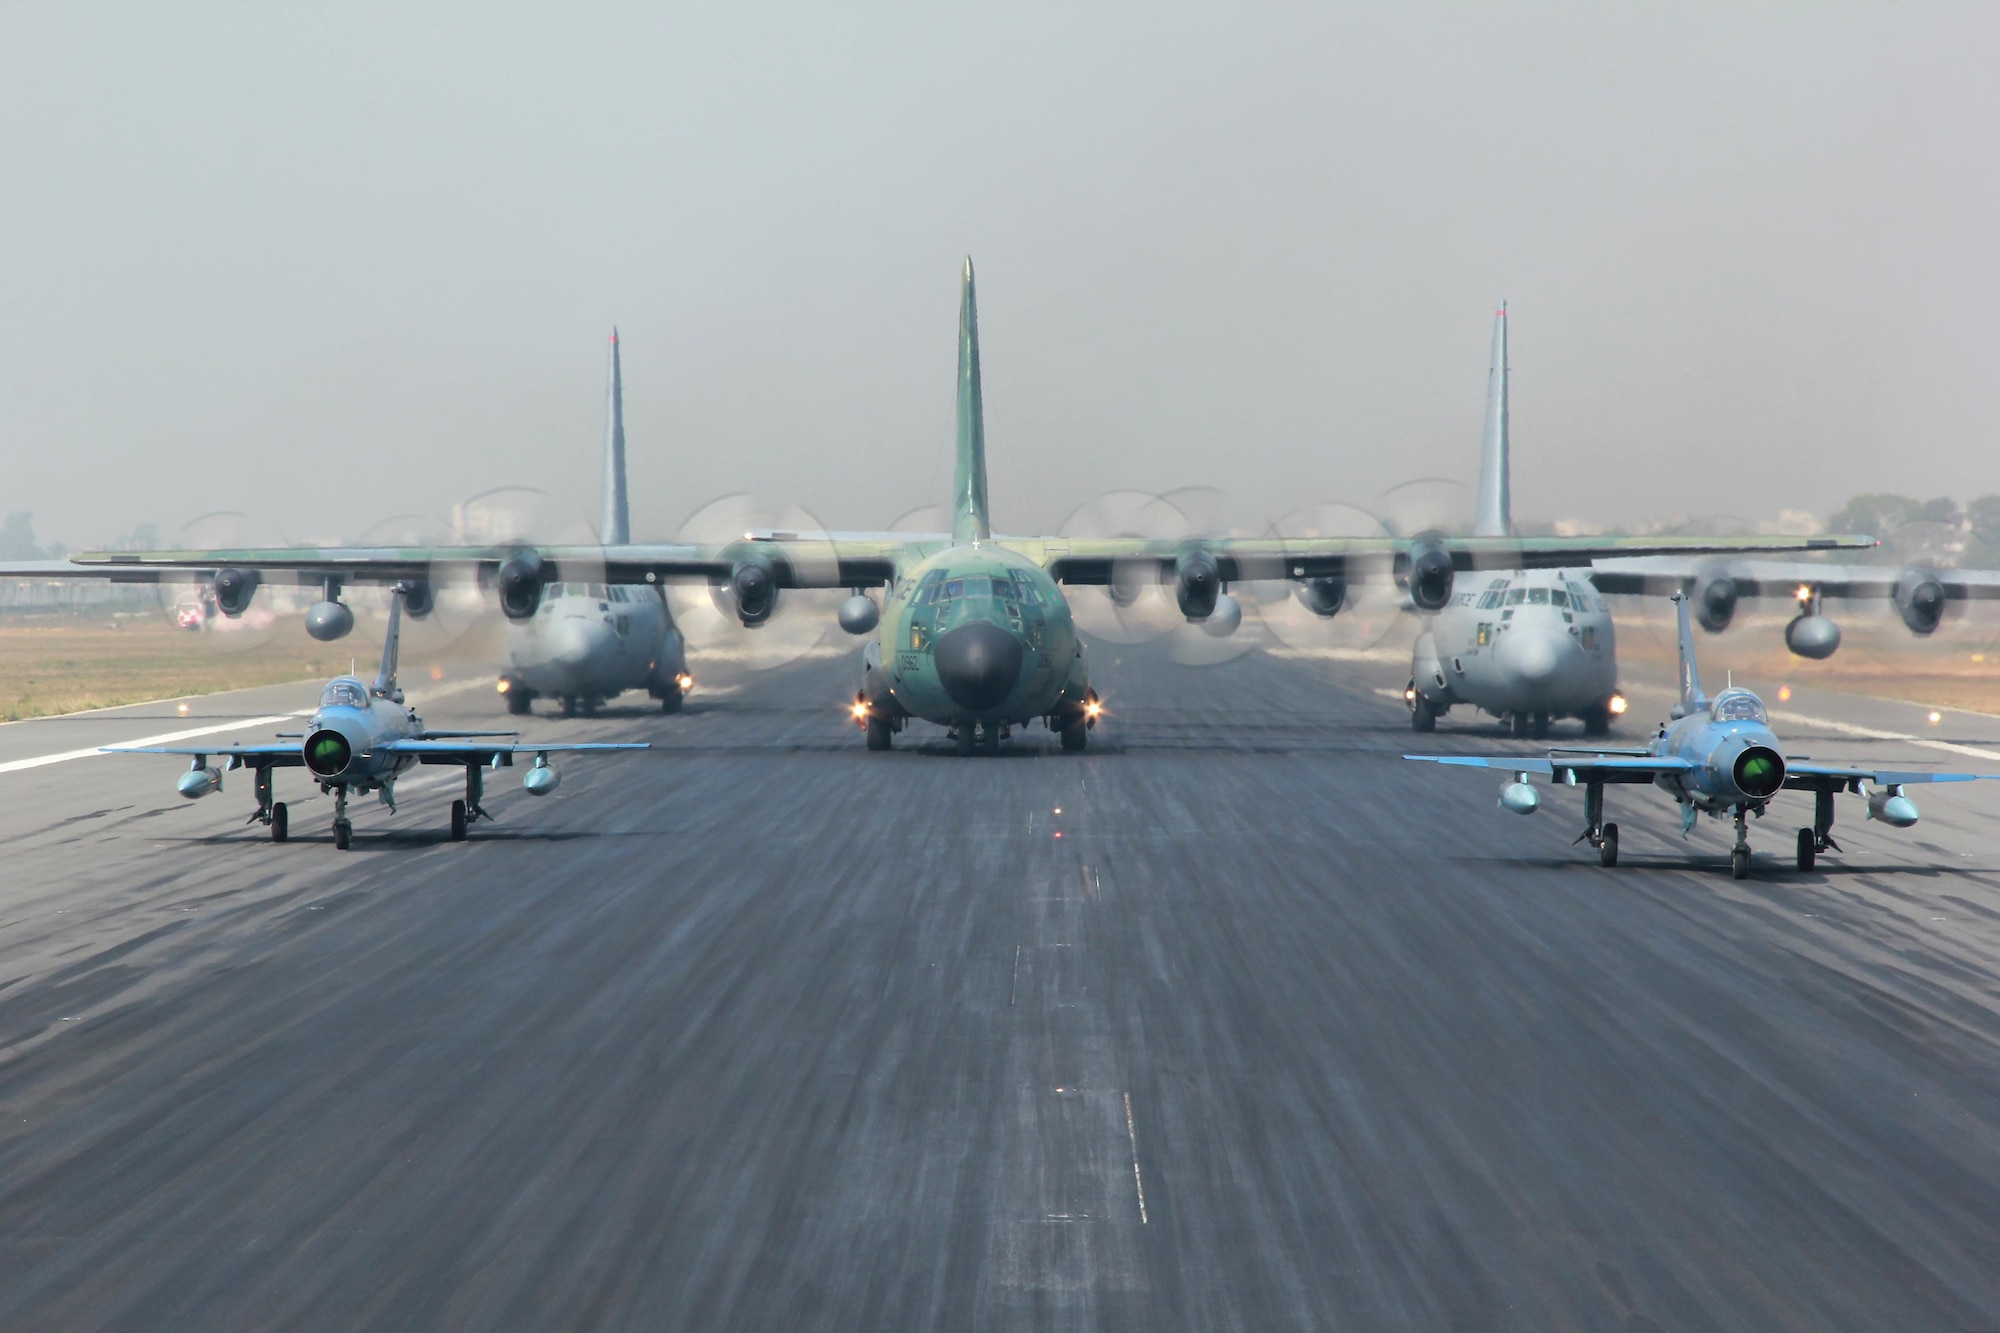 Two Bangladesh air force (BAF) F-7BG Defenders, a BAF C-130B Hercules, and two U.S. Air Force C-130H Hercules aircraft prepare to take off Jan. 28, 2015, from BAF Base Bangabandhu, Bangladesh, during exercise Cope South. Cope South is a Pacific Air Forces-sponsored, bilateral tactical airlift exercise conducted in Bangladesh, with a focus on cooperative flight operations, day and night low-level navigation, tactical airdrop, and air-land missions as well as subject matter expert exchanges in the fields of operations, maintenance and rigging disciplines. The C-130H is assigned to the 374th Airlift Wing at Yokota Air Base, Japan. (Courtesy photo/Bangladesh air force)